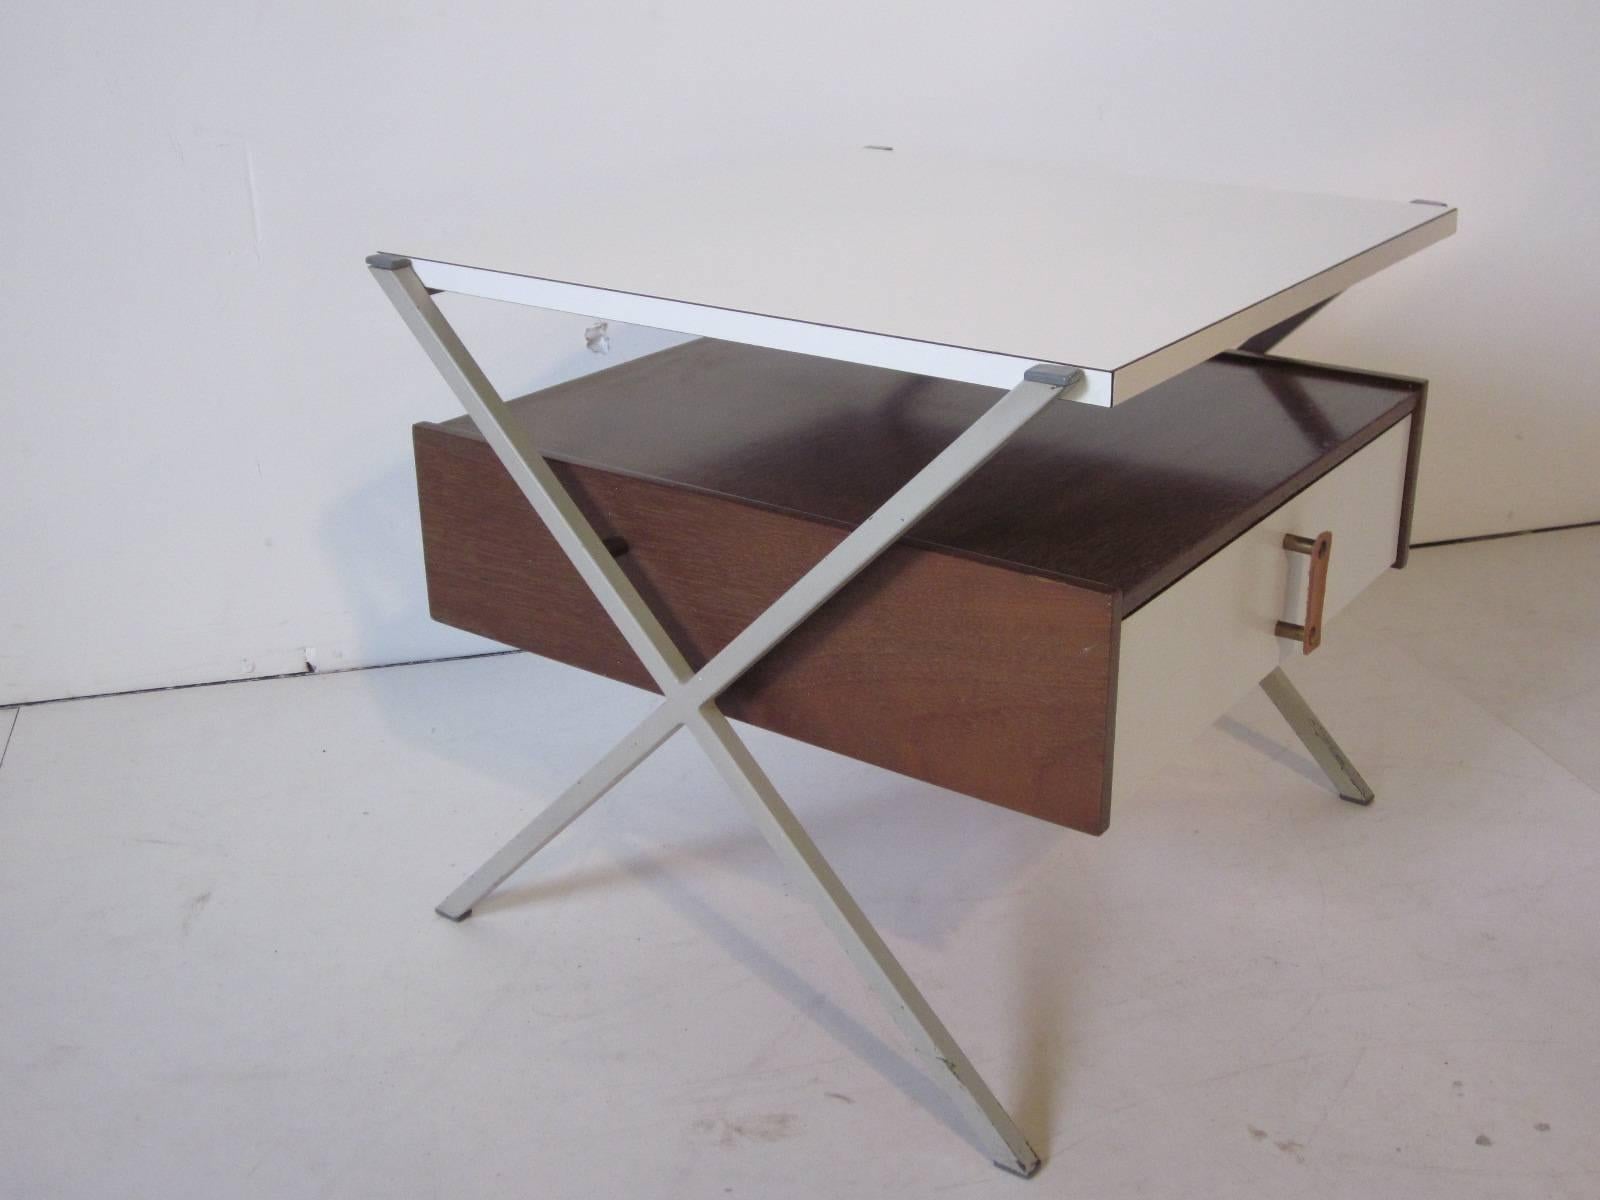 A nightstand or side table designed by Ladislav Sutnar for Knoll - Drake with metal X legs, walnut body, white laminate top and drawer front with brass and leather pull. A rare and hard to find form manufactured by Knoll.